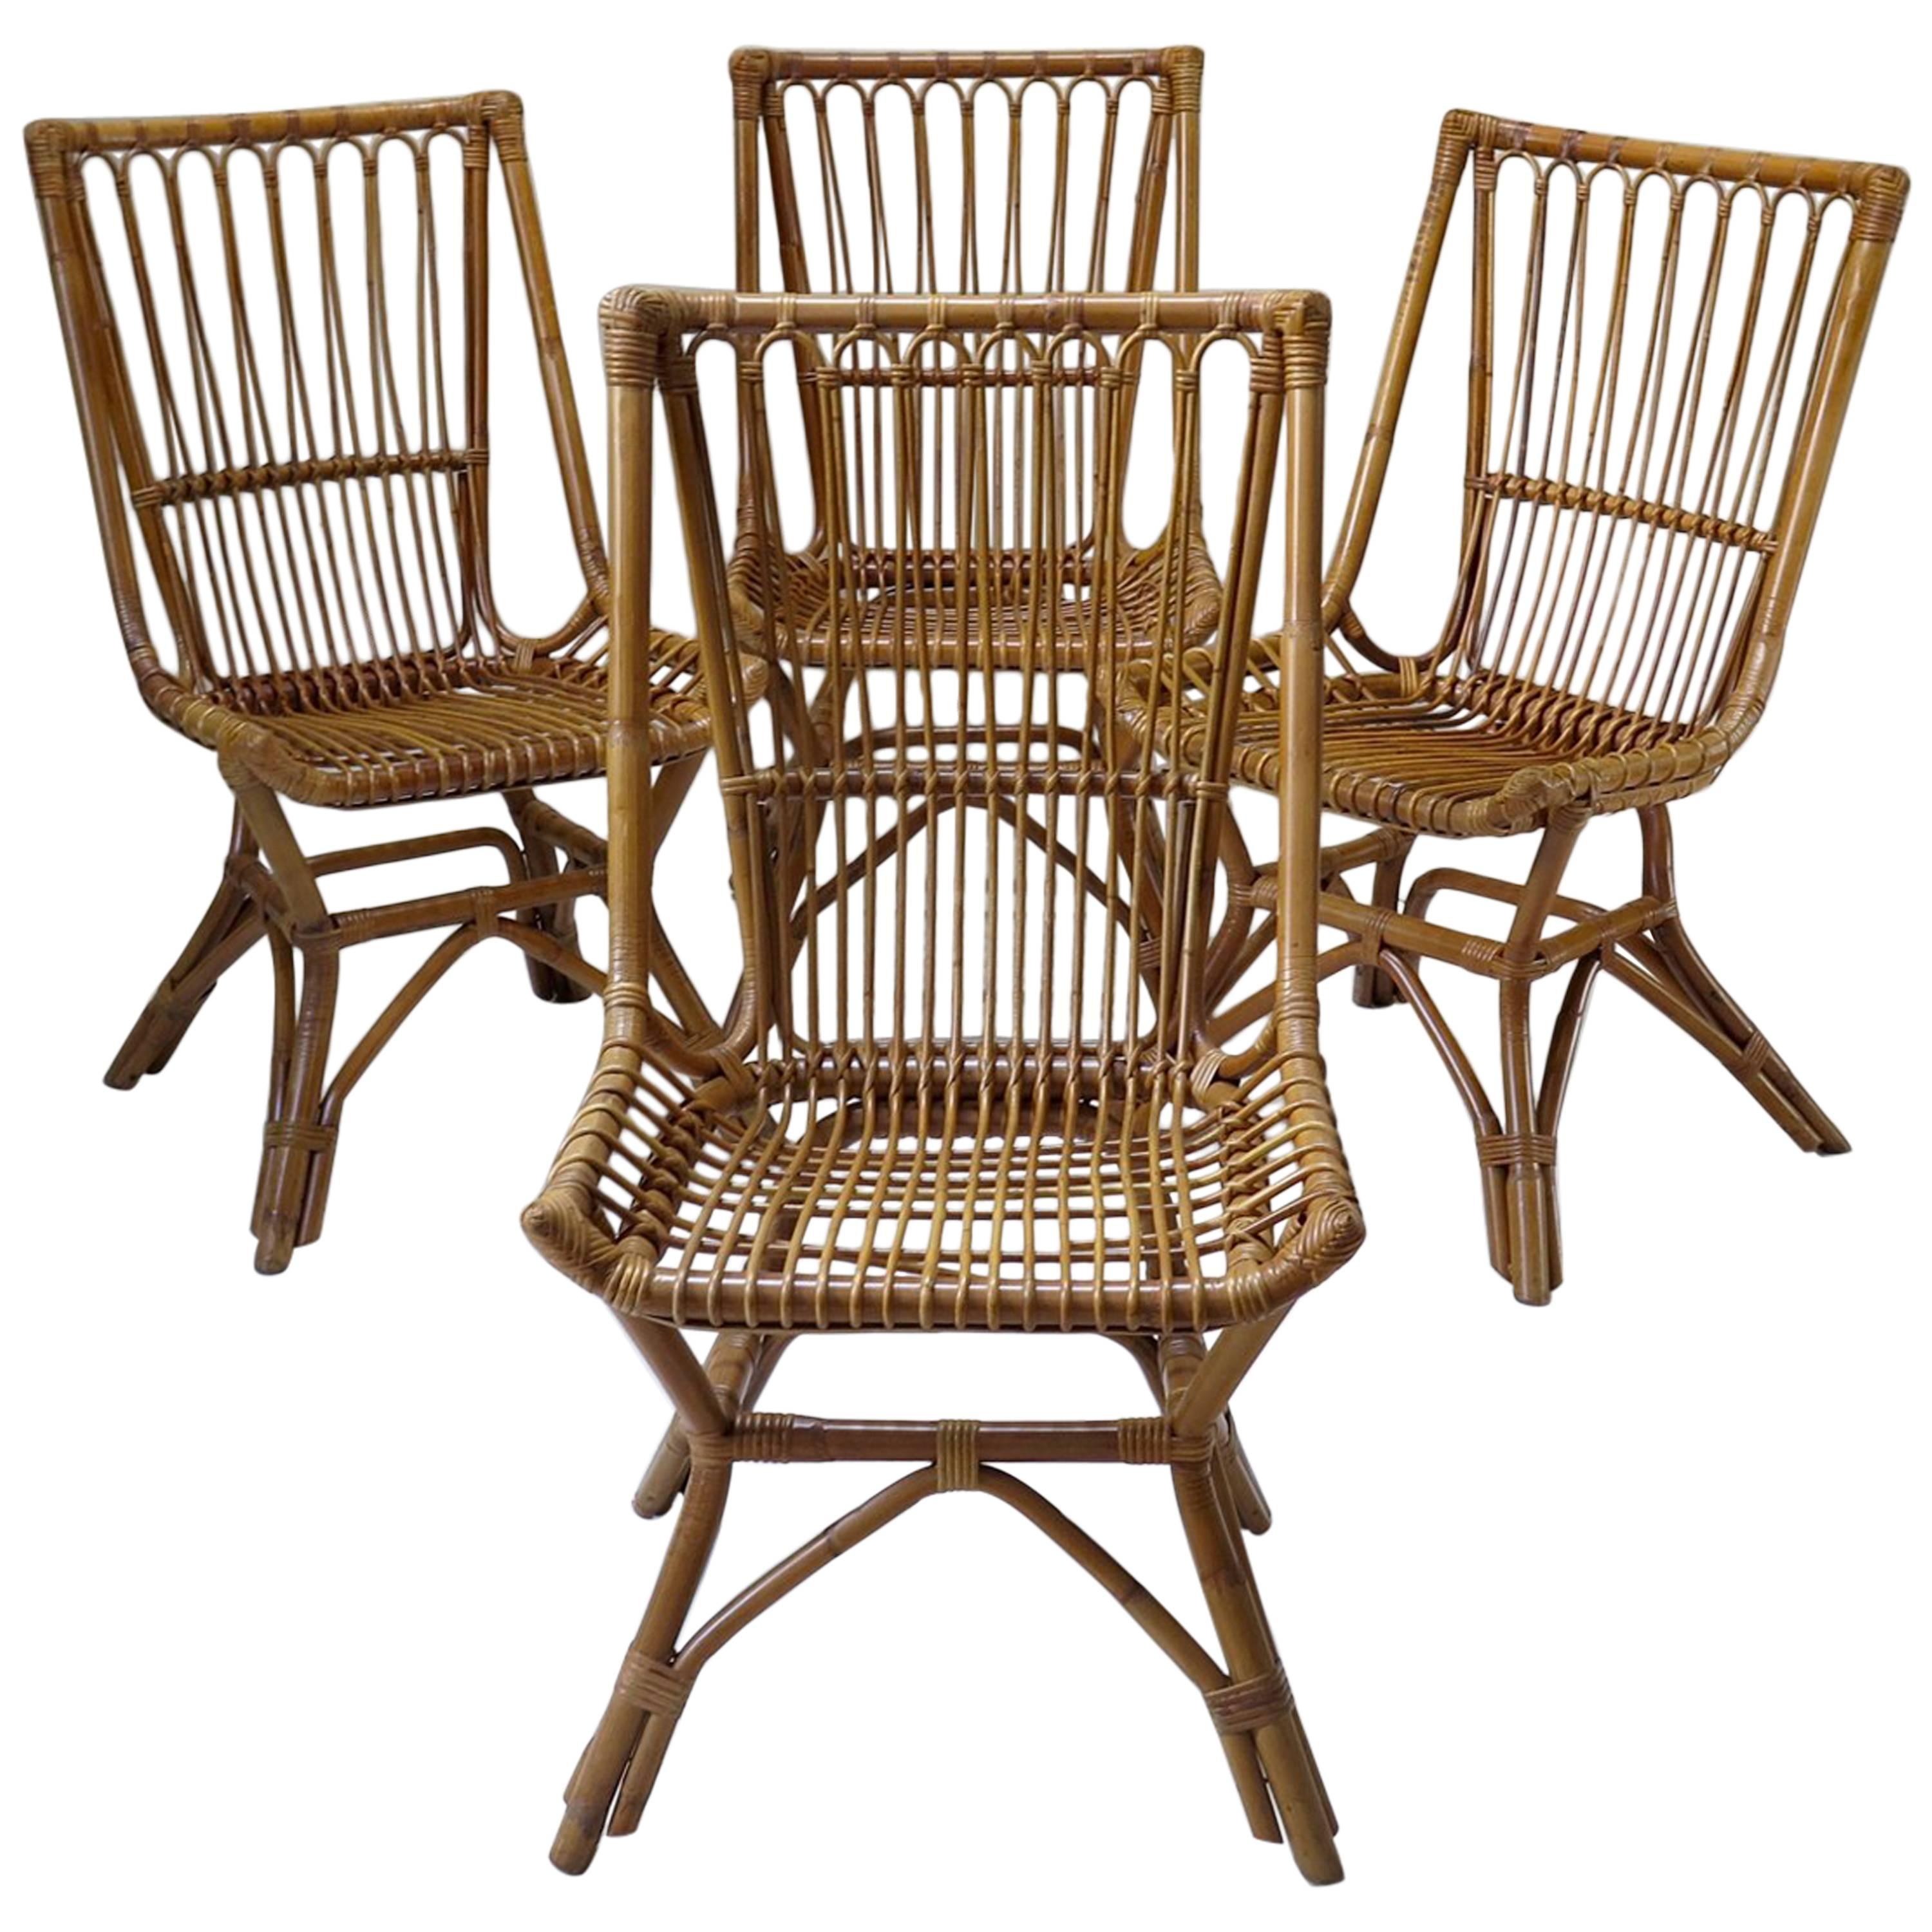 Six French Mid-Century Wicker Chairs